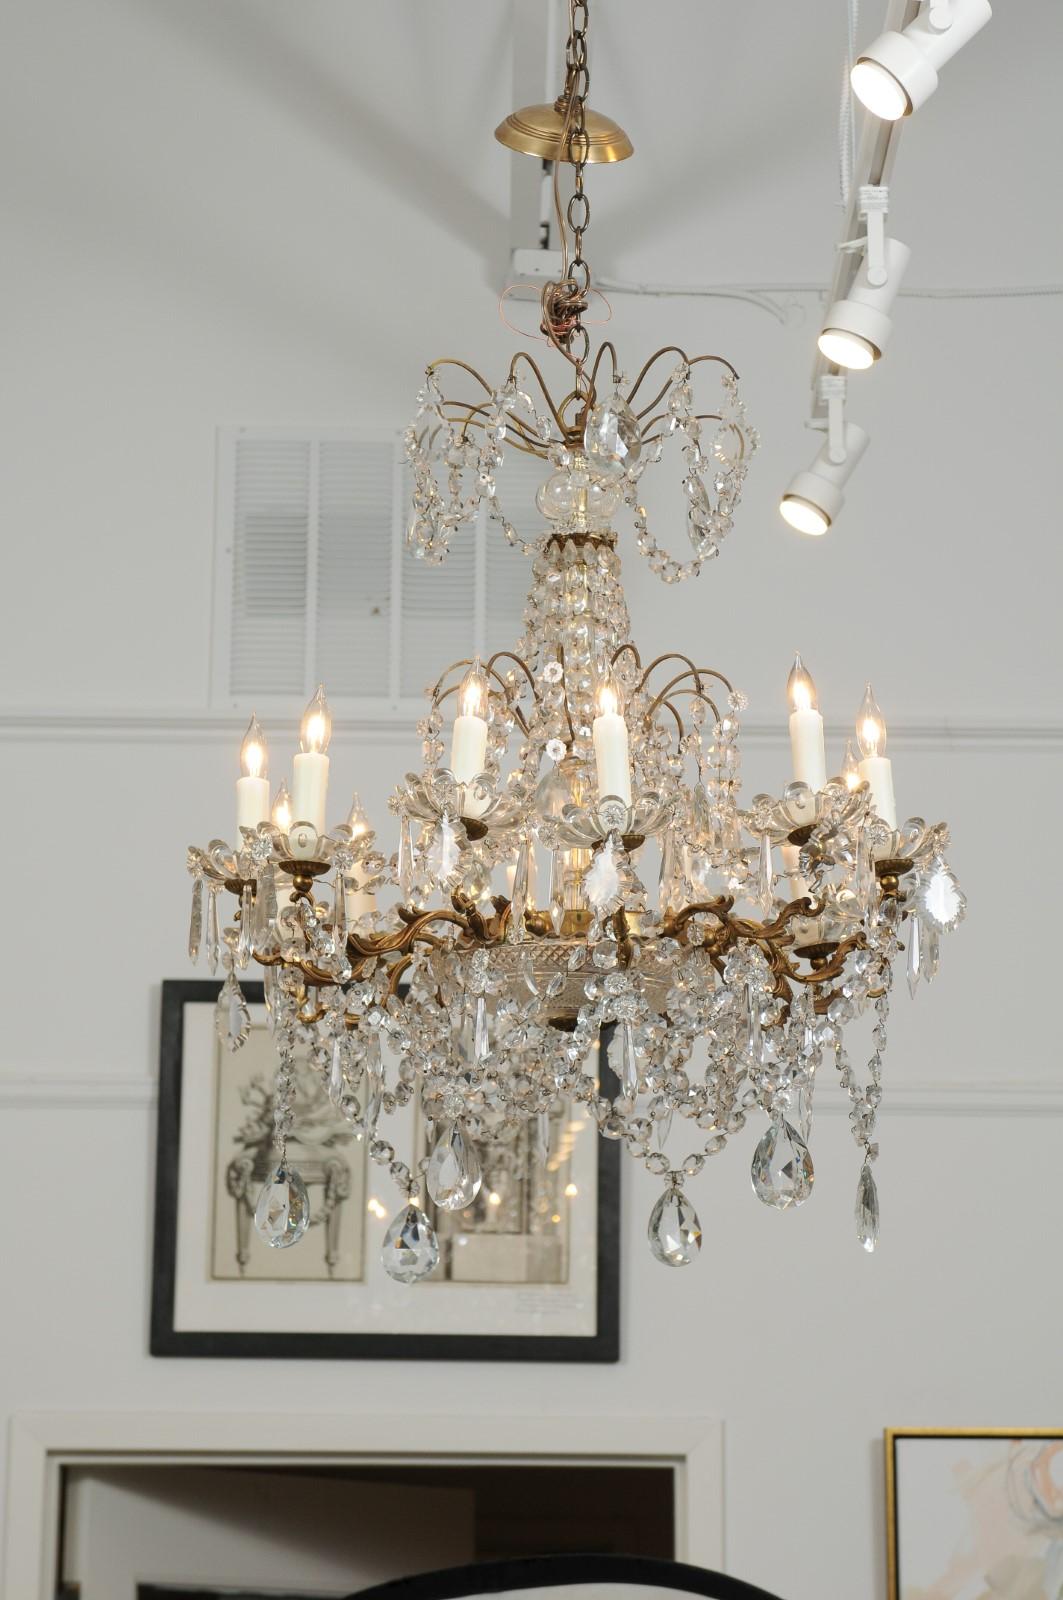 A French brass crystal twelve-light chandelier from the first half of the 20th century, with delicately scrolled arms and a multitude of faceted crystals. Magnificent brass and crystal chandelier from France, 1920s with 12 candles, all newly